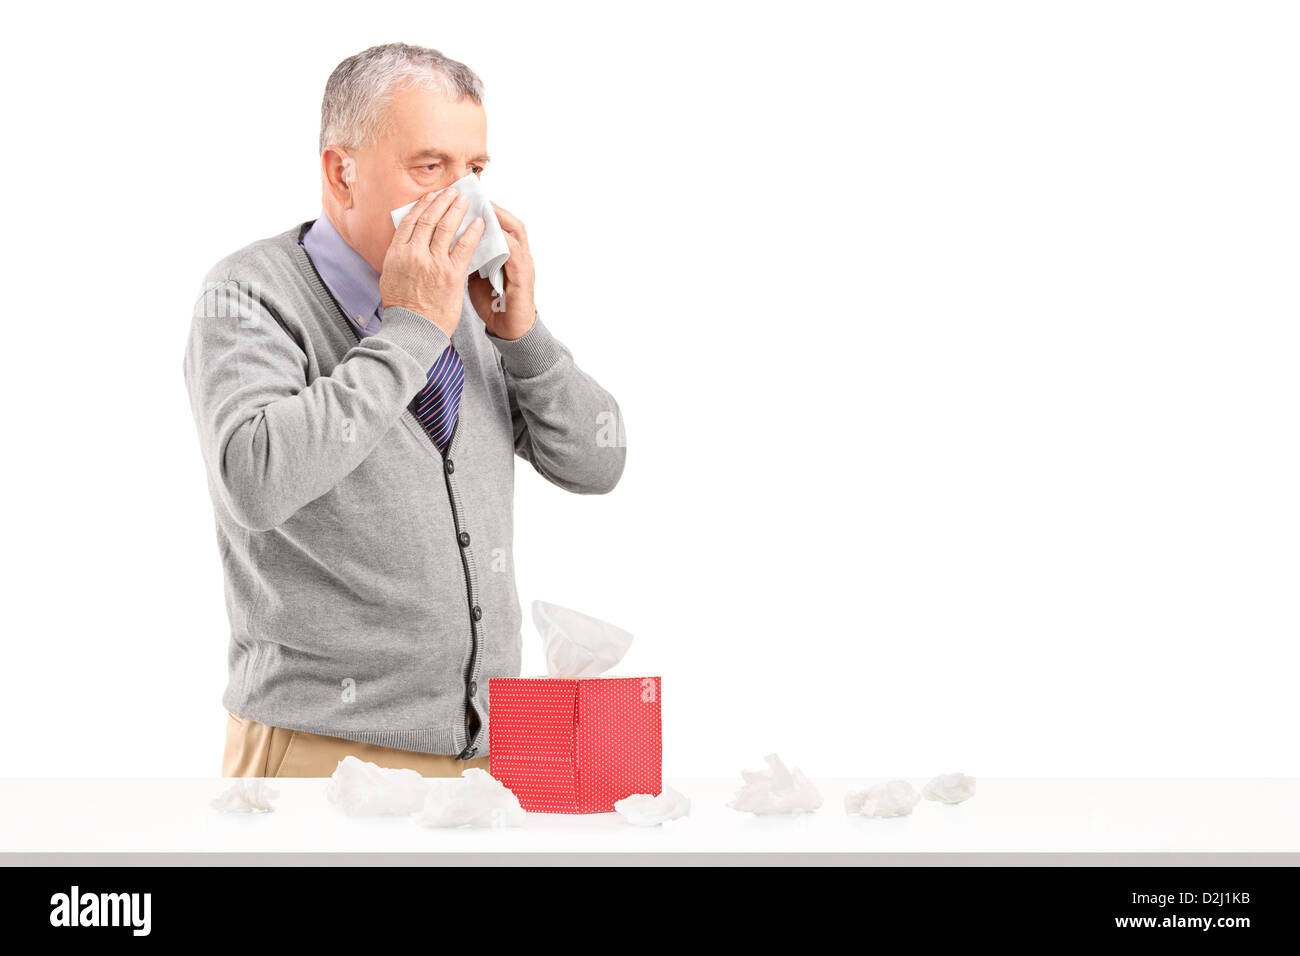 Man blowing nose with a box of tissues on a table isolated on white background Stock Photo